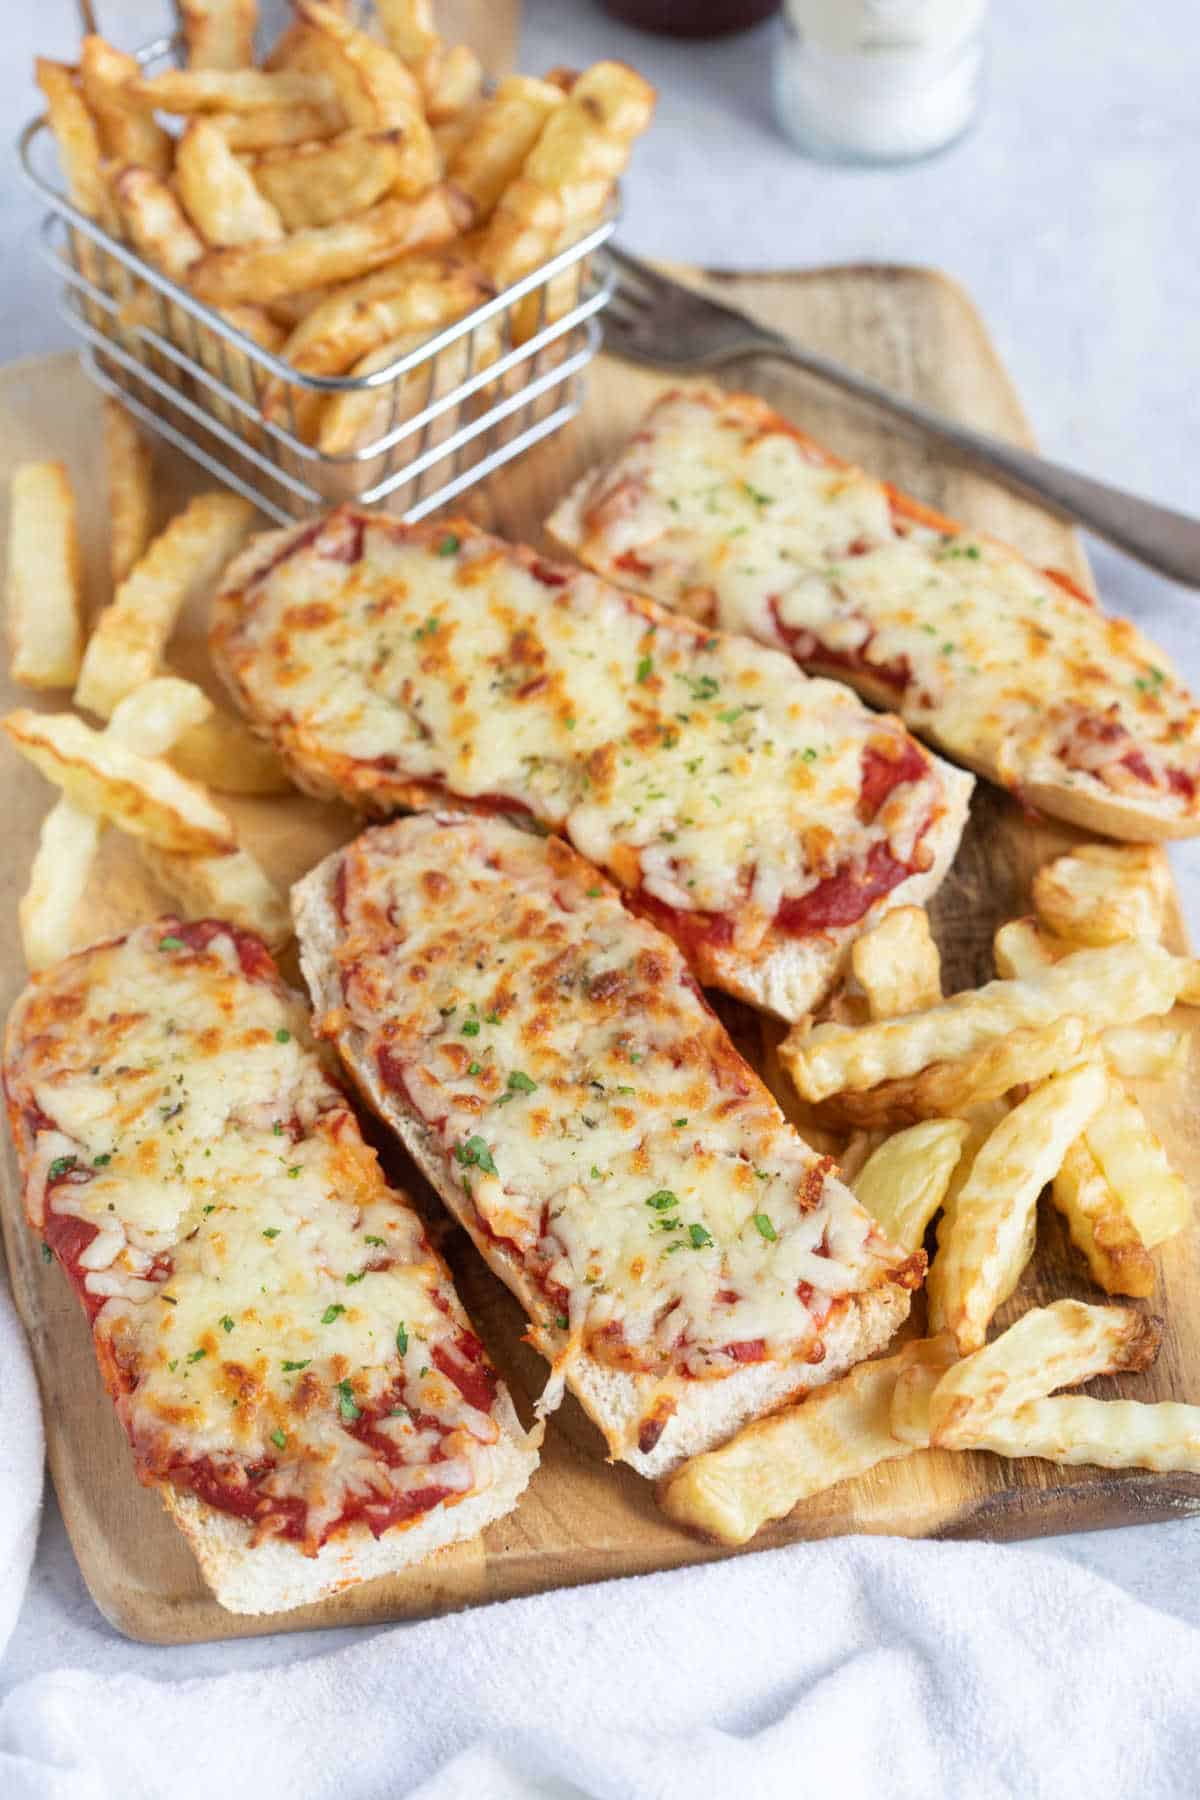 Slices of air fryer French bread pizza with air fryer chips.